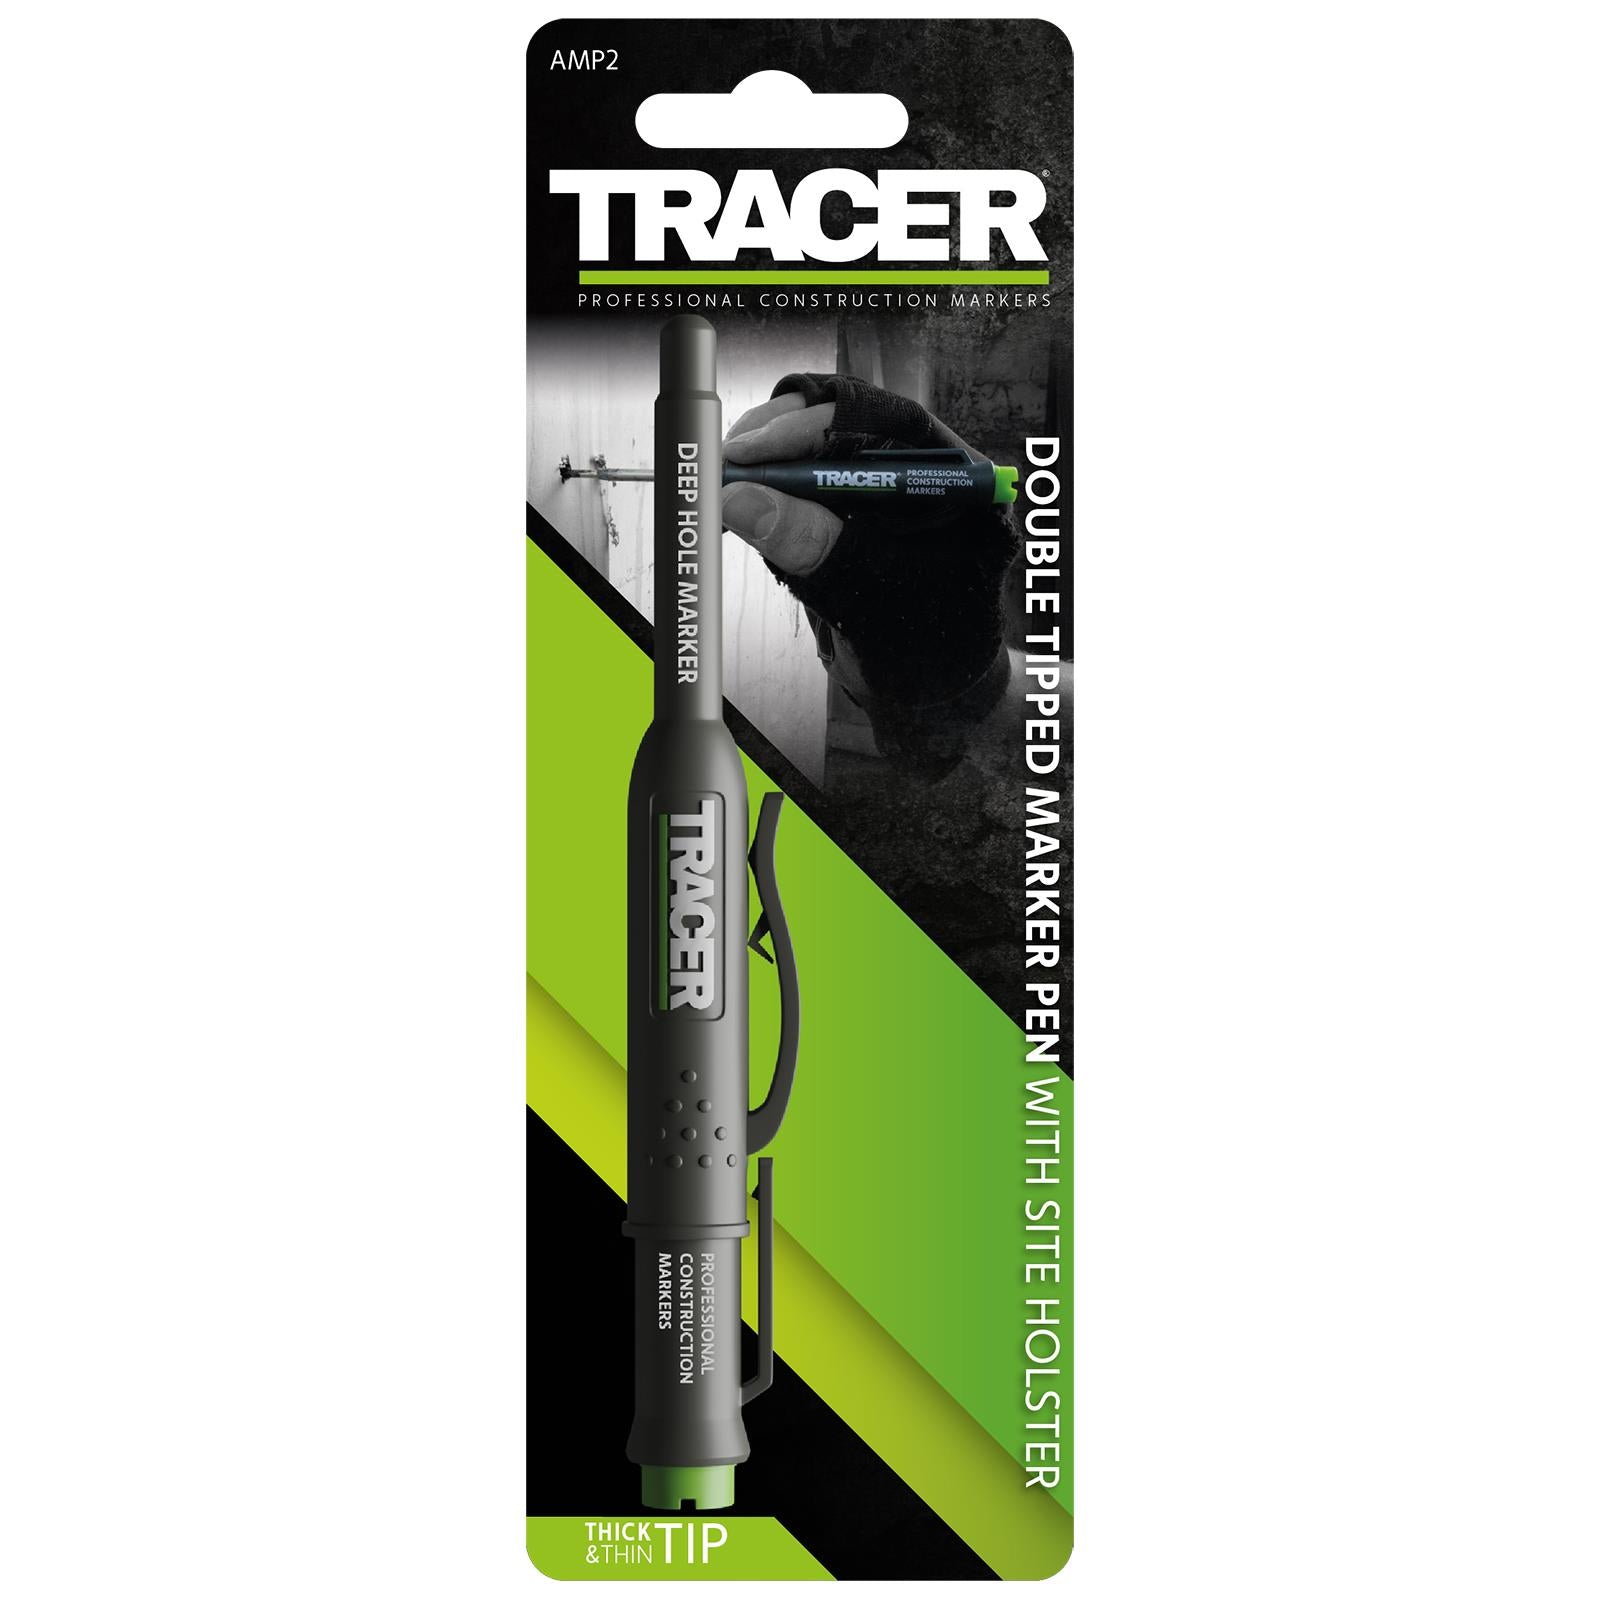 TRACER Double Tipped Marker Pen and Site Holster 50mm Depth